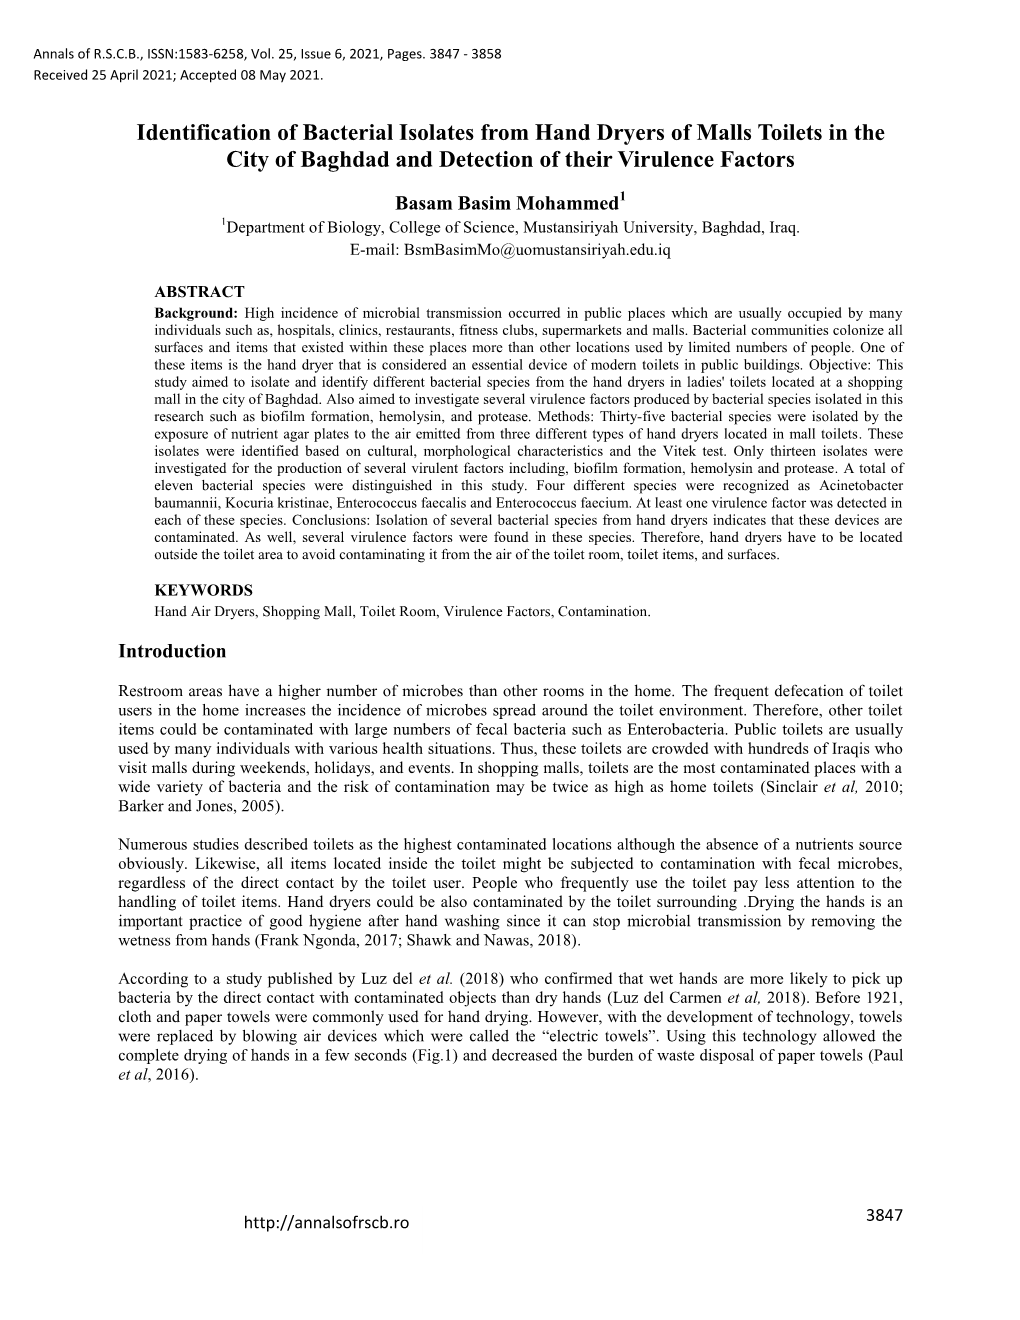 Identification of Bacterial Isolates from Hand Dryers of Malls Toilets in the City of Baghdad and Detection of Their Virulence Factors